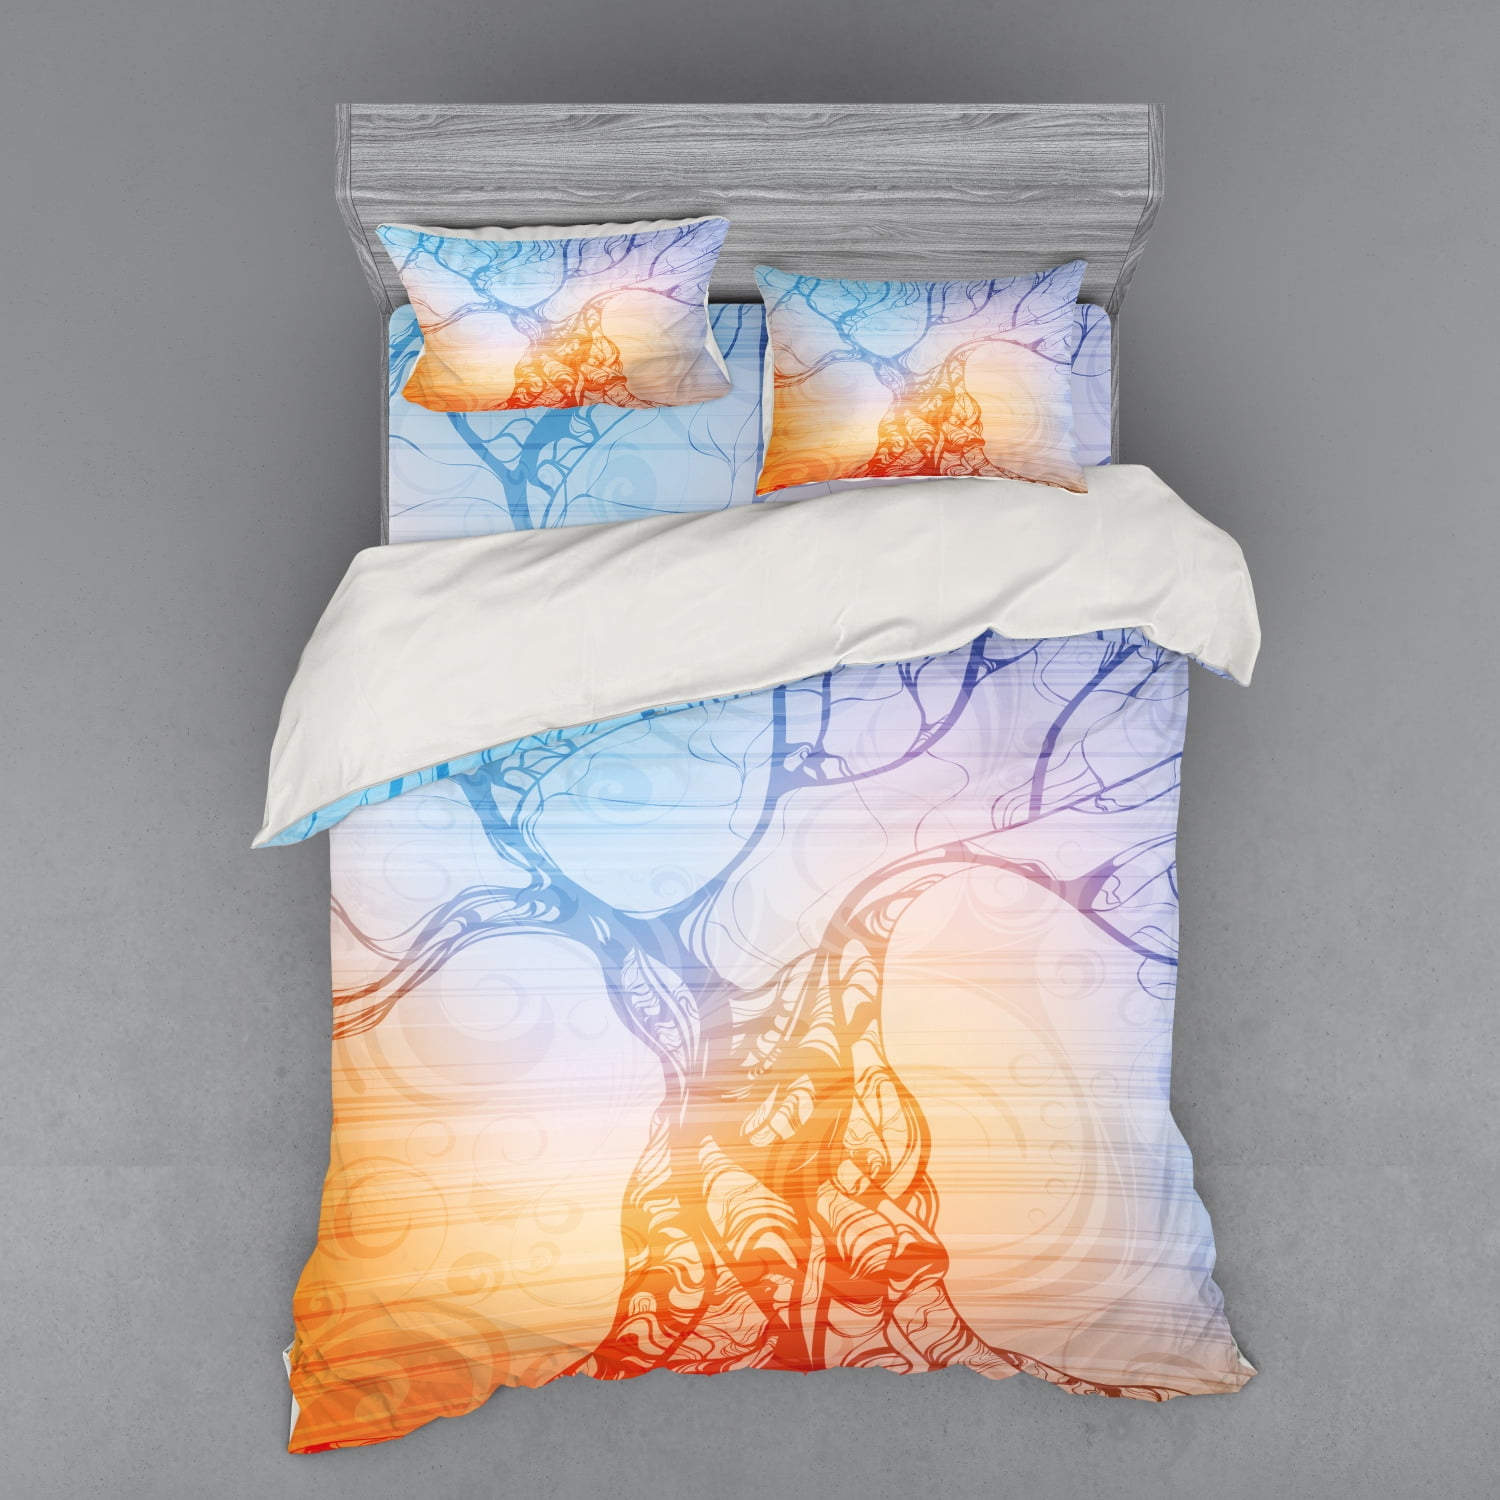 Tree Duvet Cover Set Silhouette In Color Changes Bedding Set